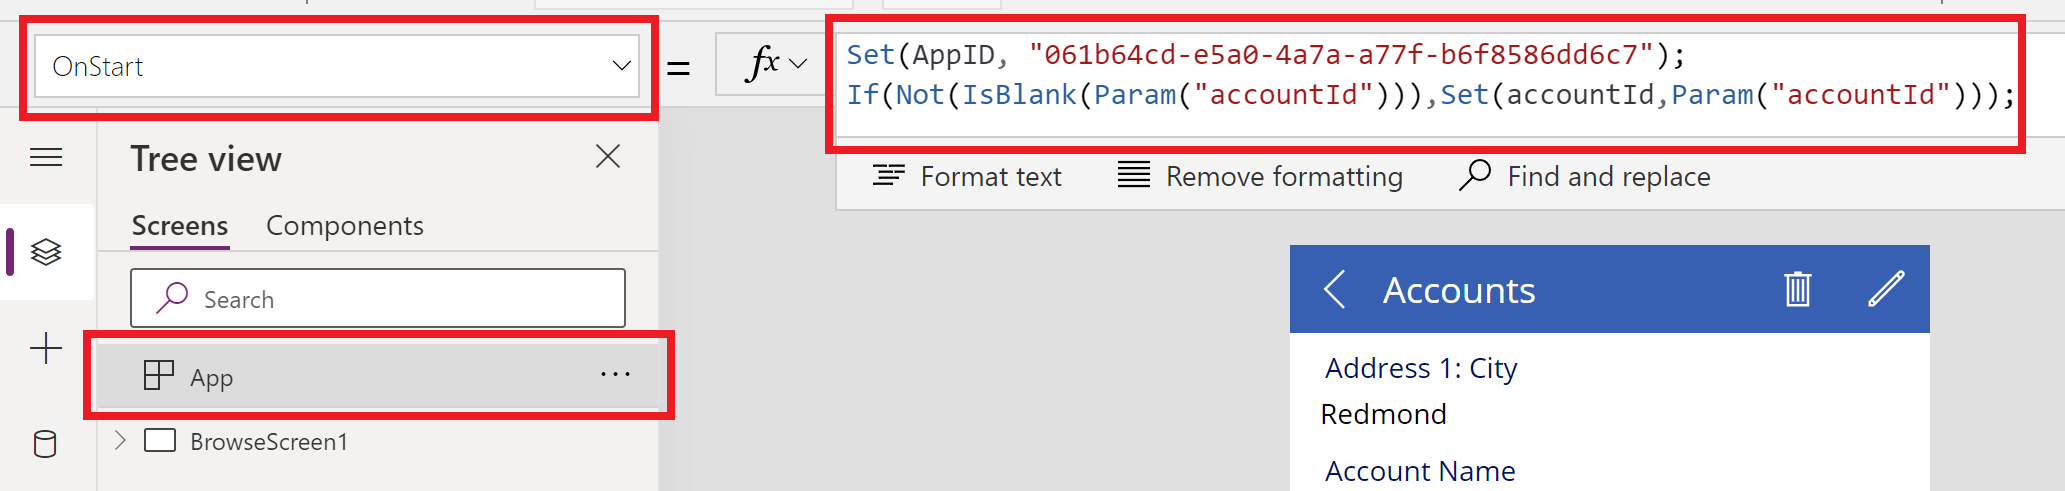 App OnStart formula with Set and Param functions.